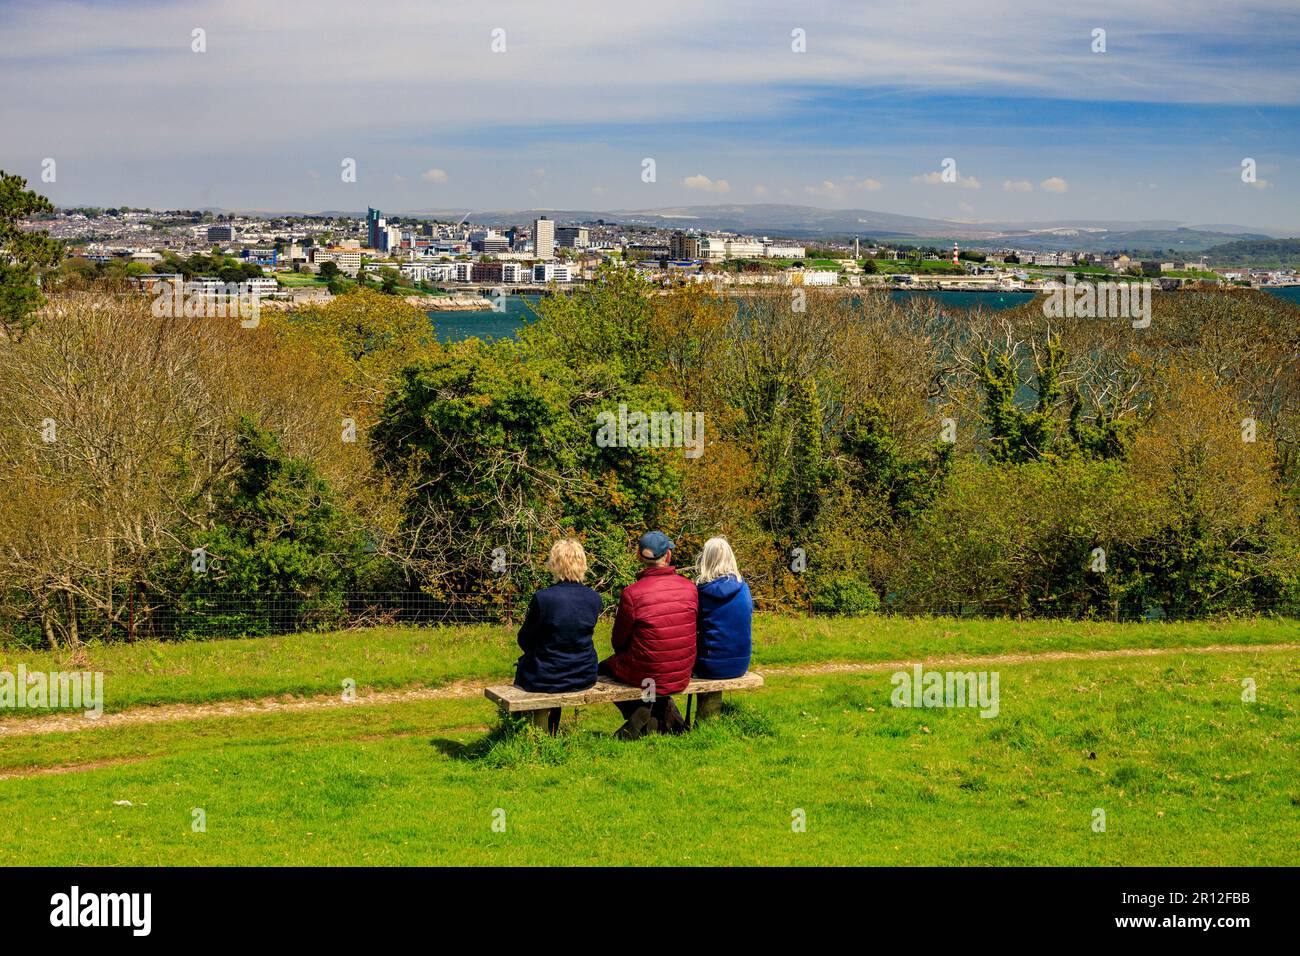 Three visitors looking across the River Tamar towards the Plymouth waterfront and The Hoe from Mount Edgcumbe Country Park, Cornwall, England, UK Stock Photo